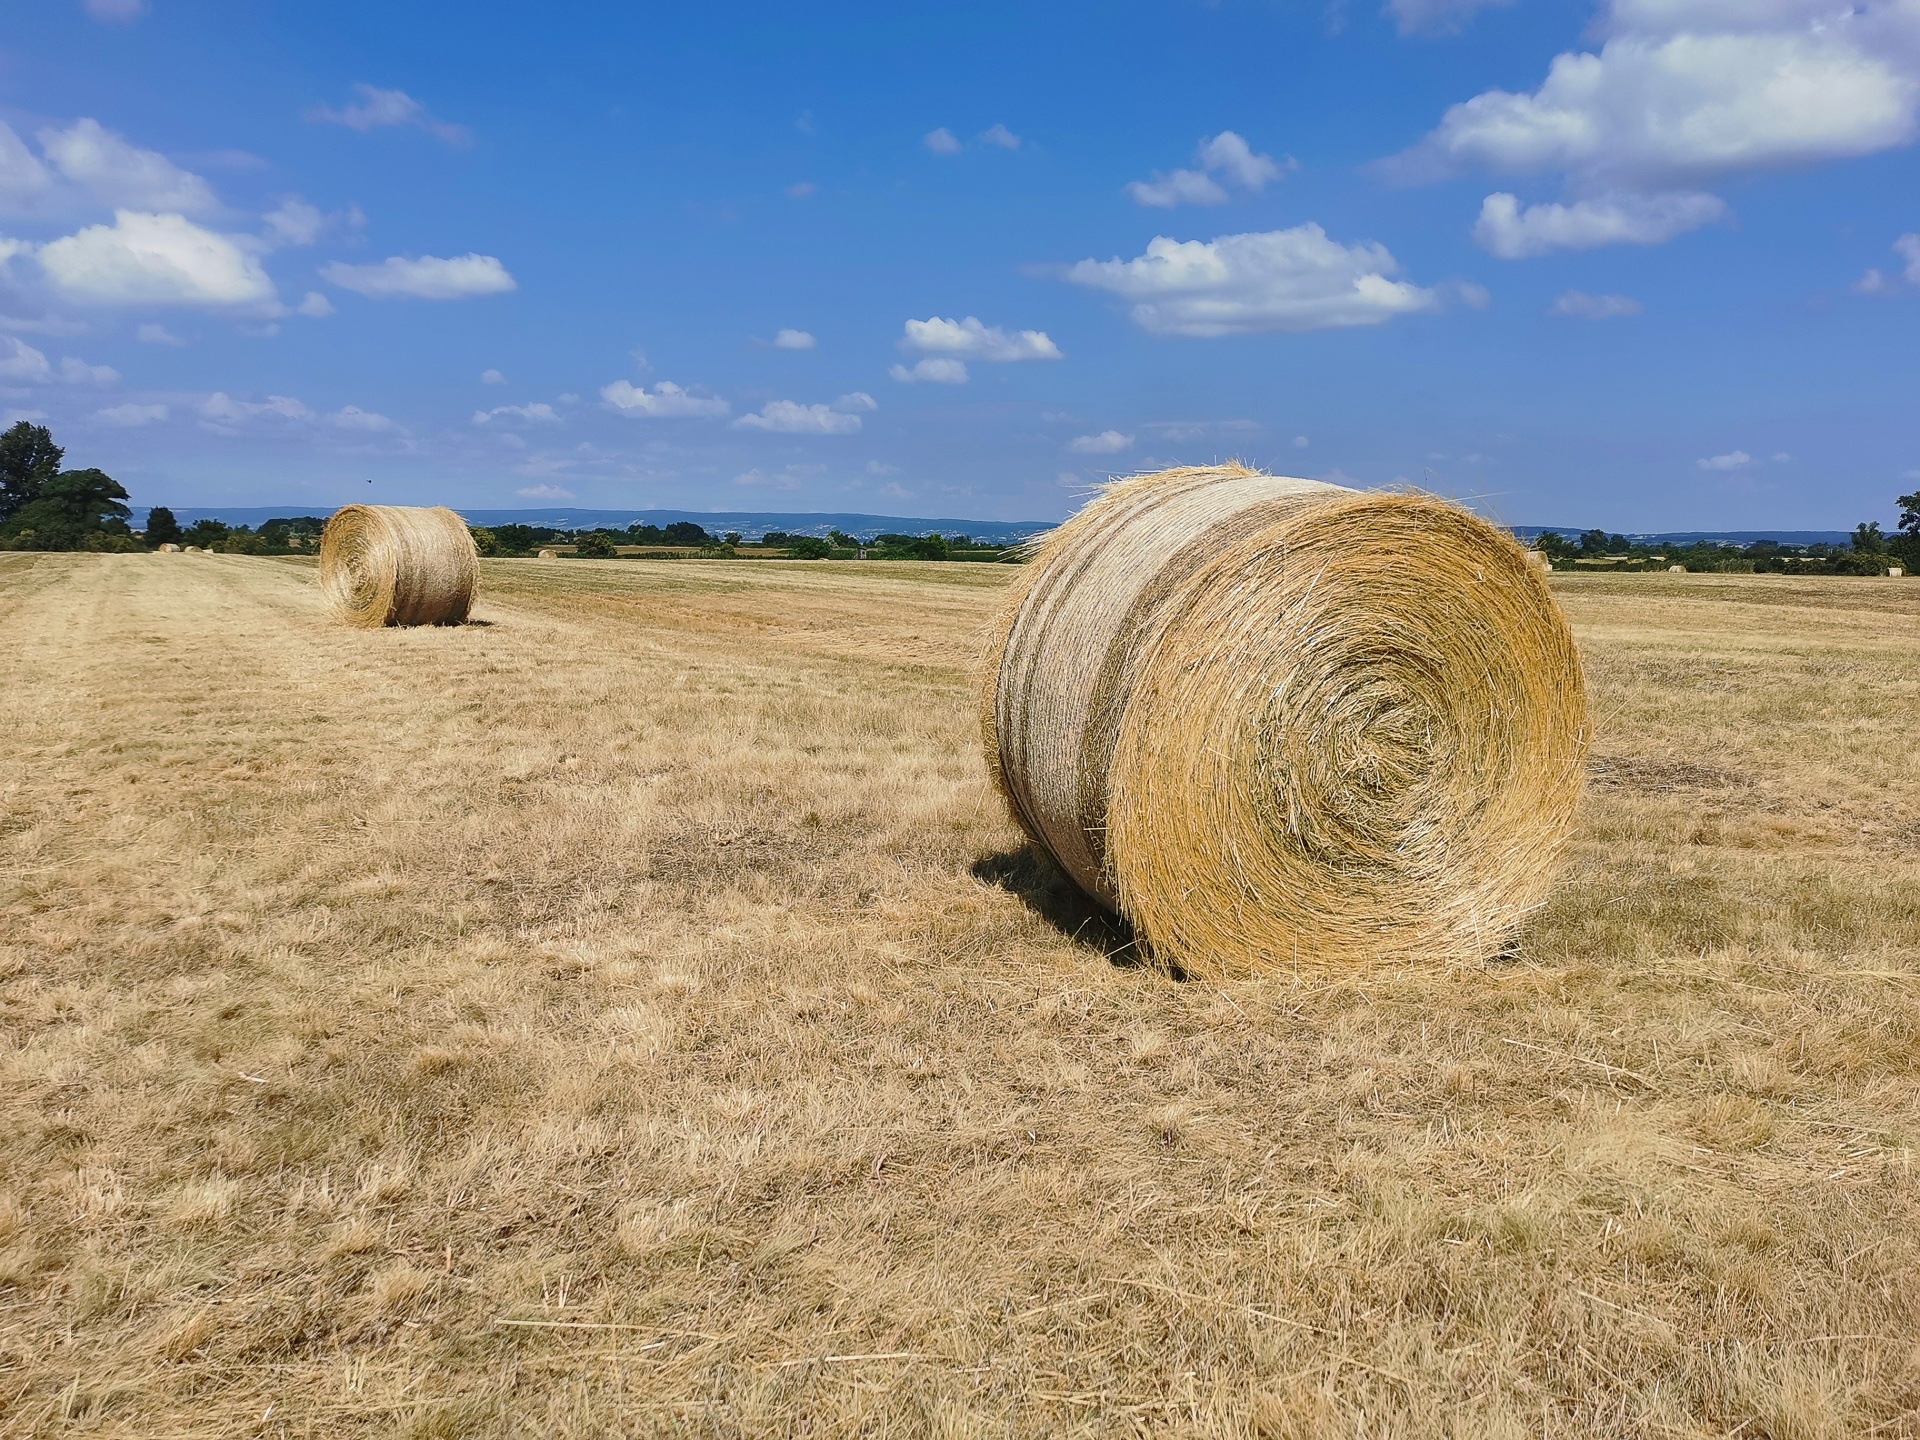 Bales Of Straw On The Field